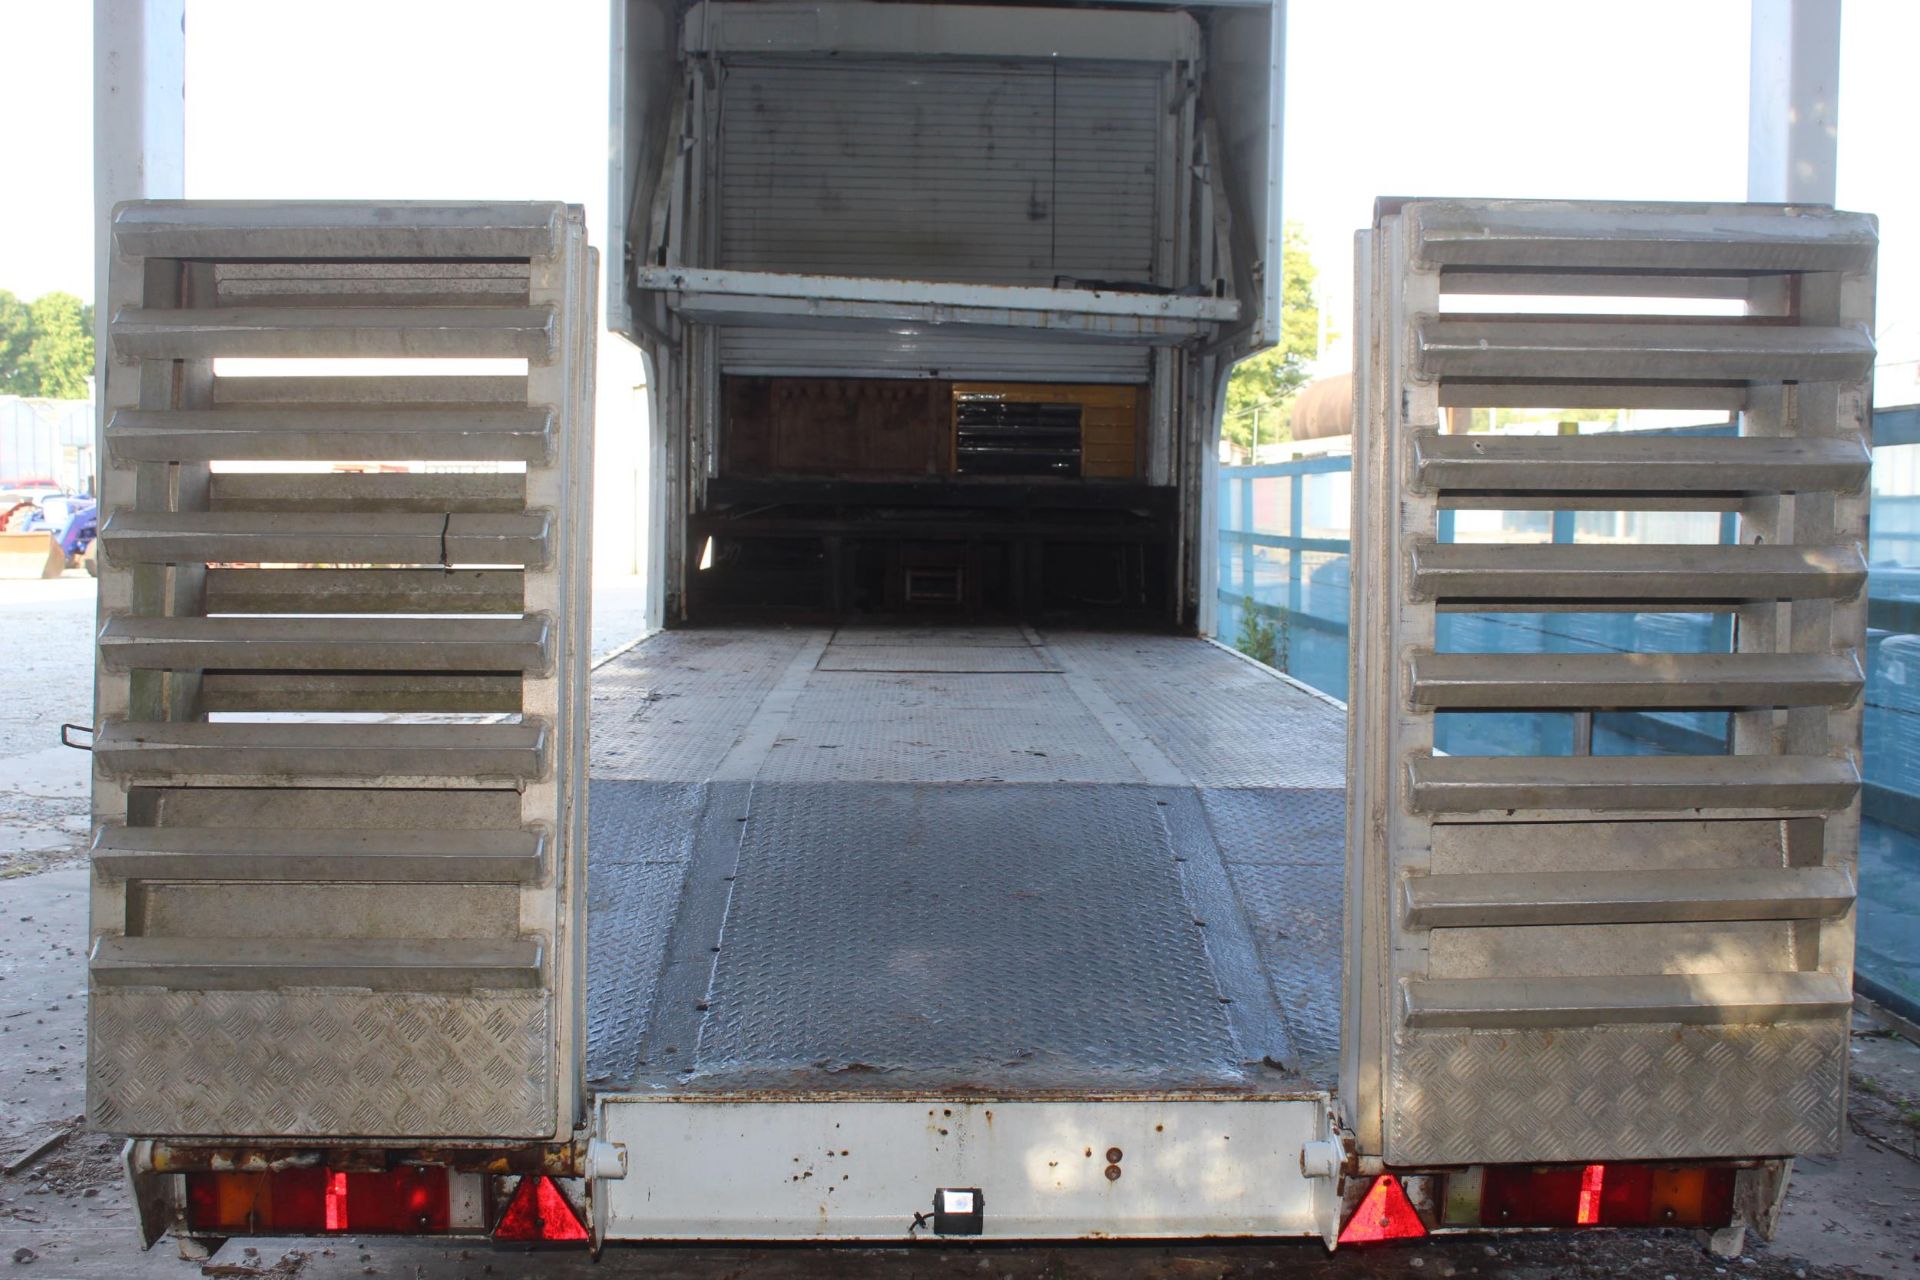 A 43FT WAGON CAR TRANSPORTER TRAILER WITH CAR RAMPS AND THE FRONT SECTION KITTED OUT WITH SLEEPING - Image 5 of 8